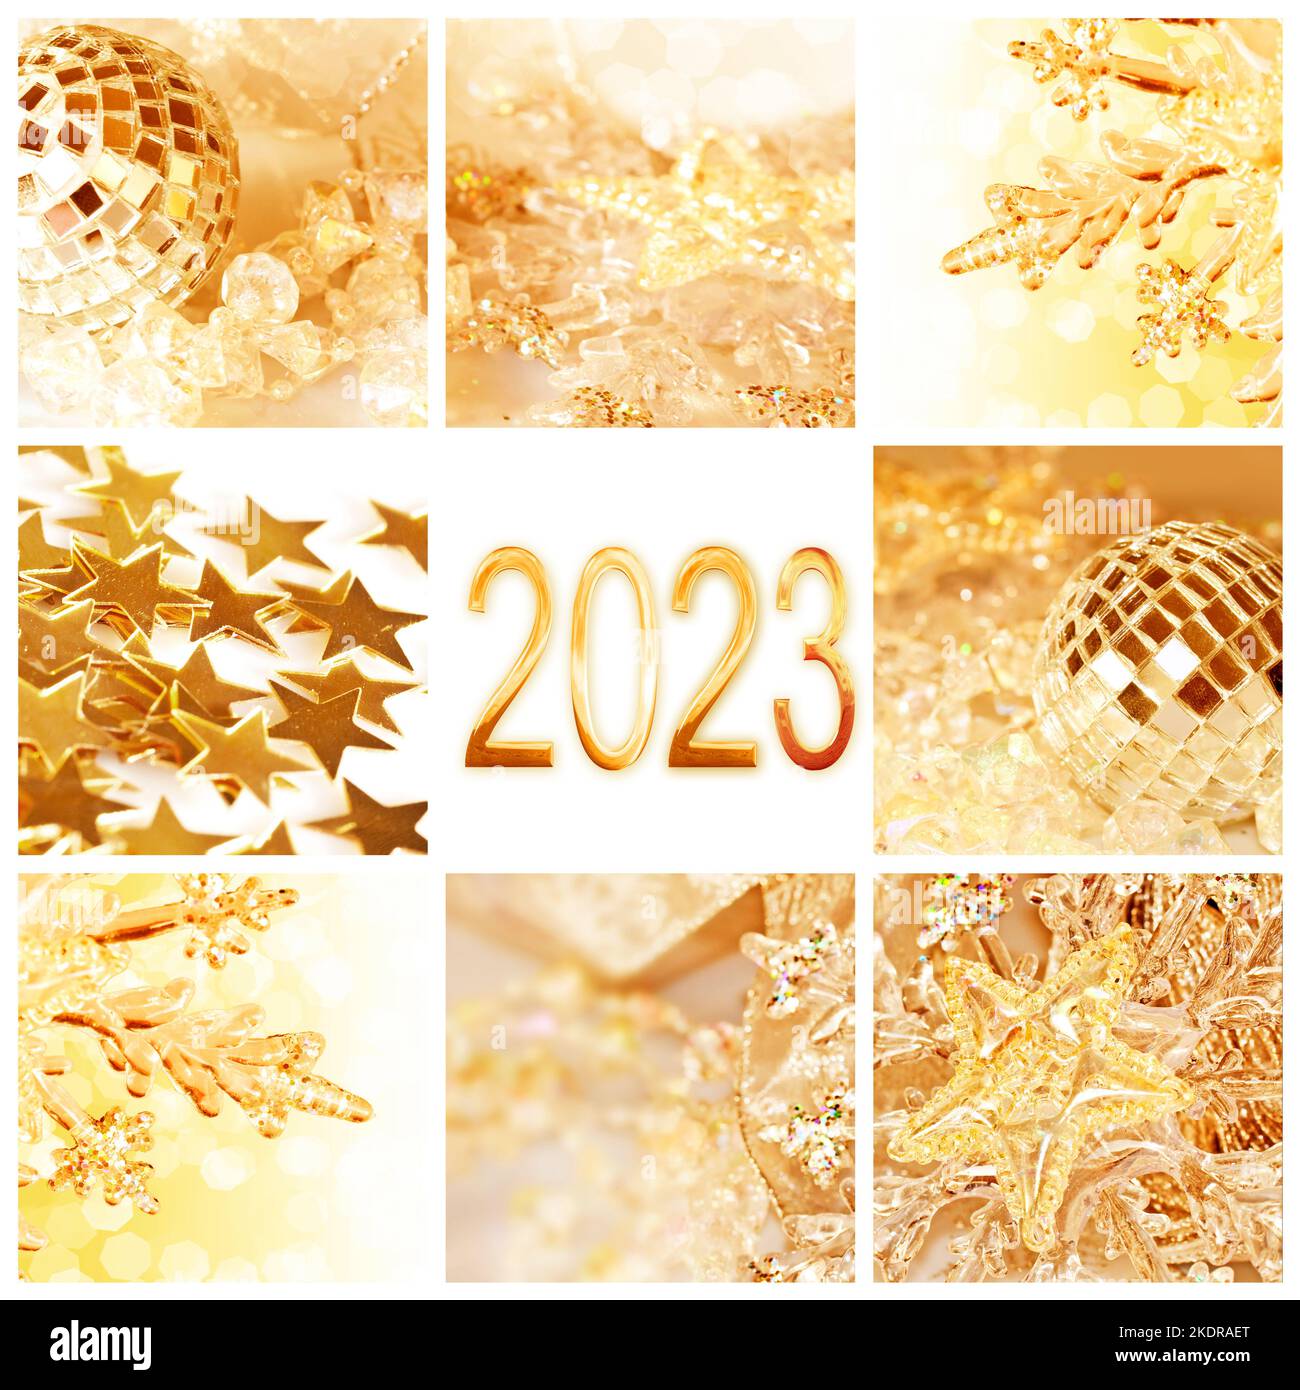 2023, golden christmas ornaments collage square greeting card Stock Photo